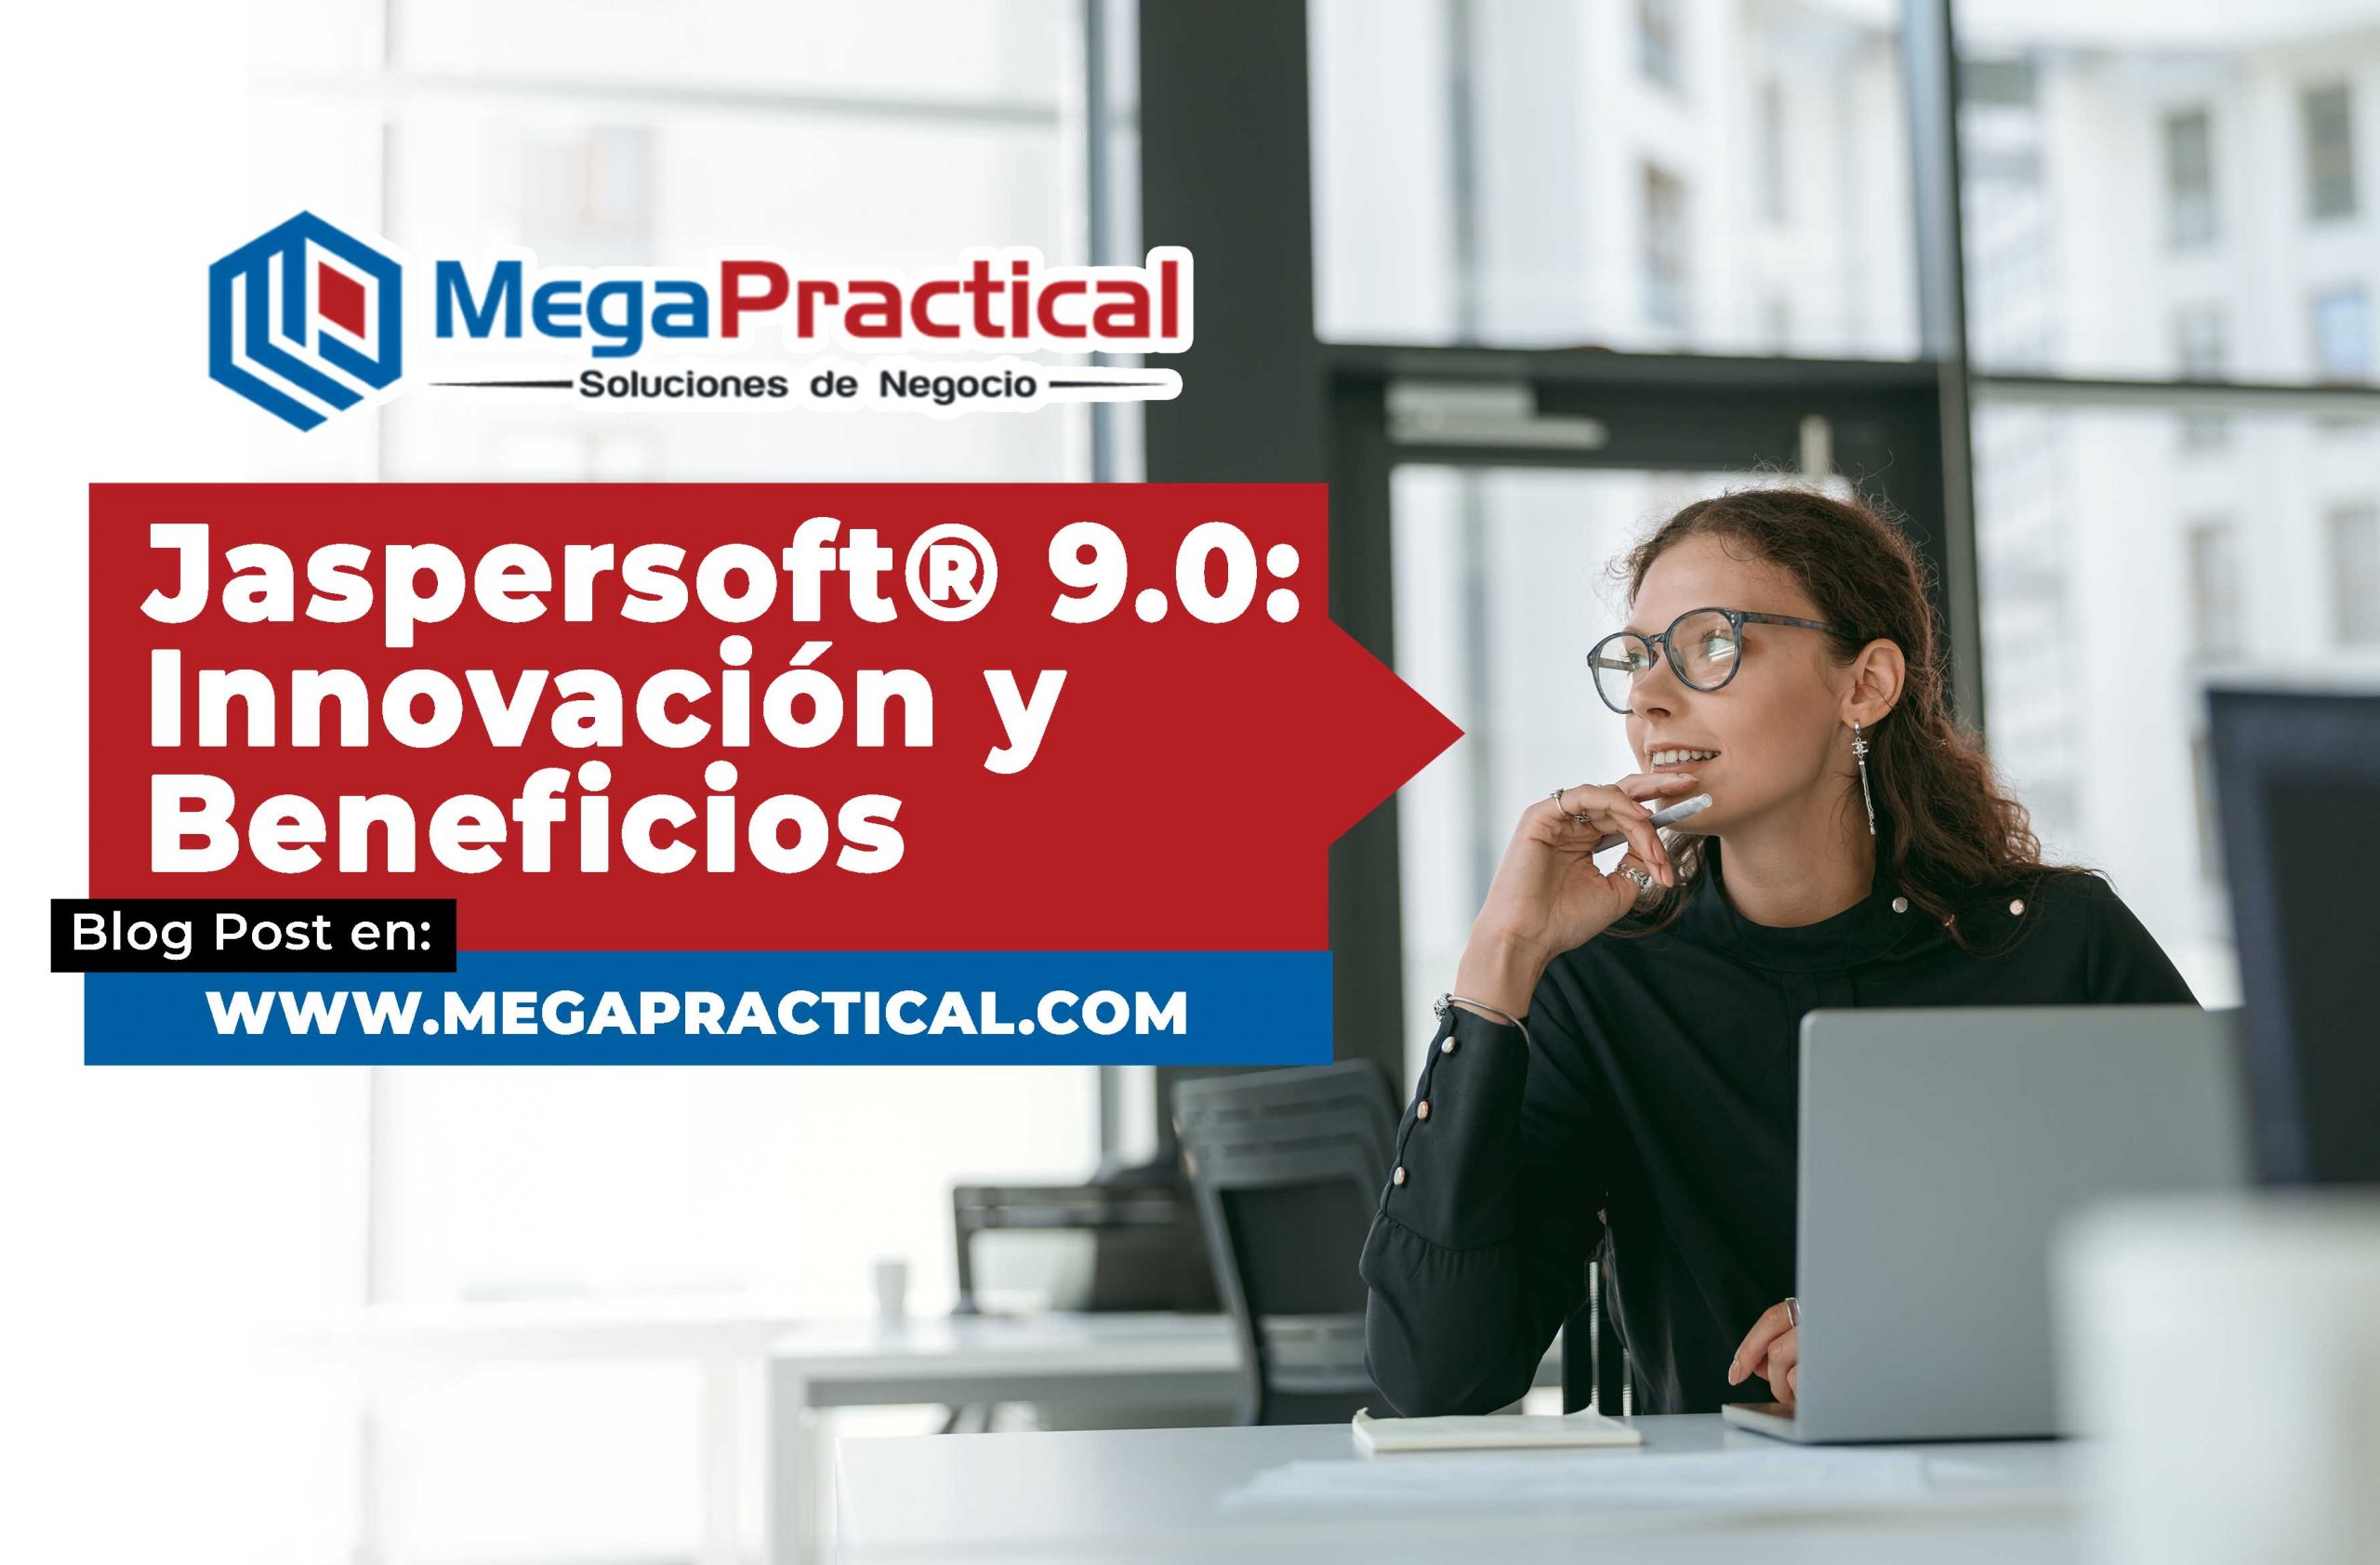 Jaspersoft® 9.0: Innovación y Beneficios EmpresarialesConceptual image of business woman without head and daily routin